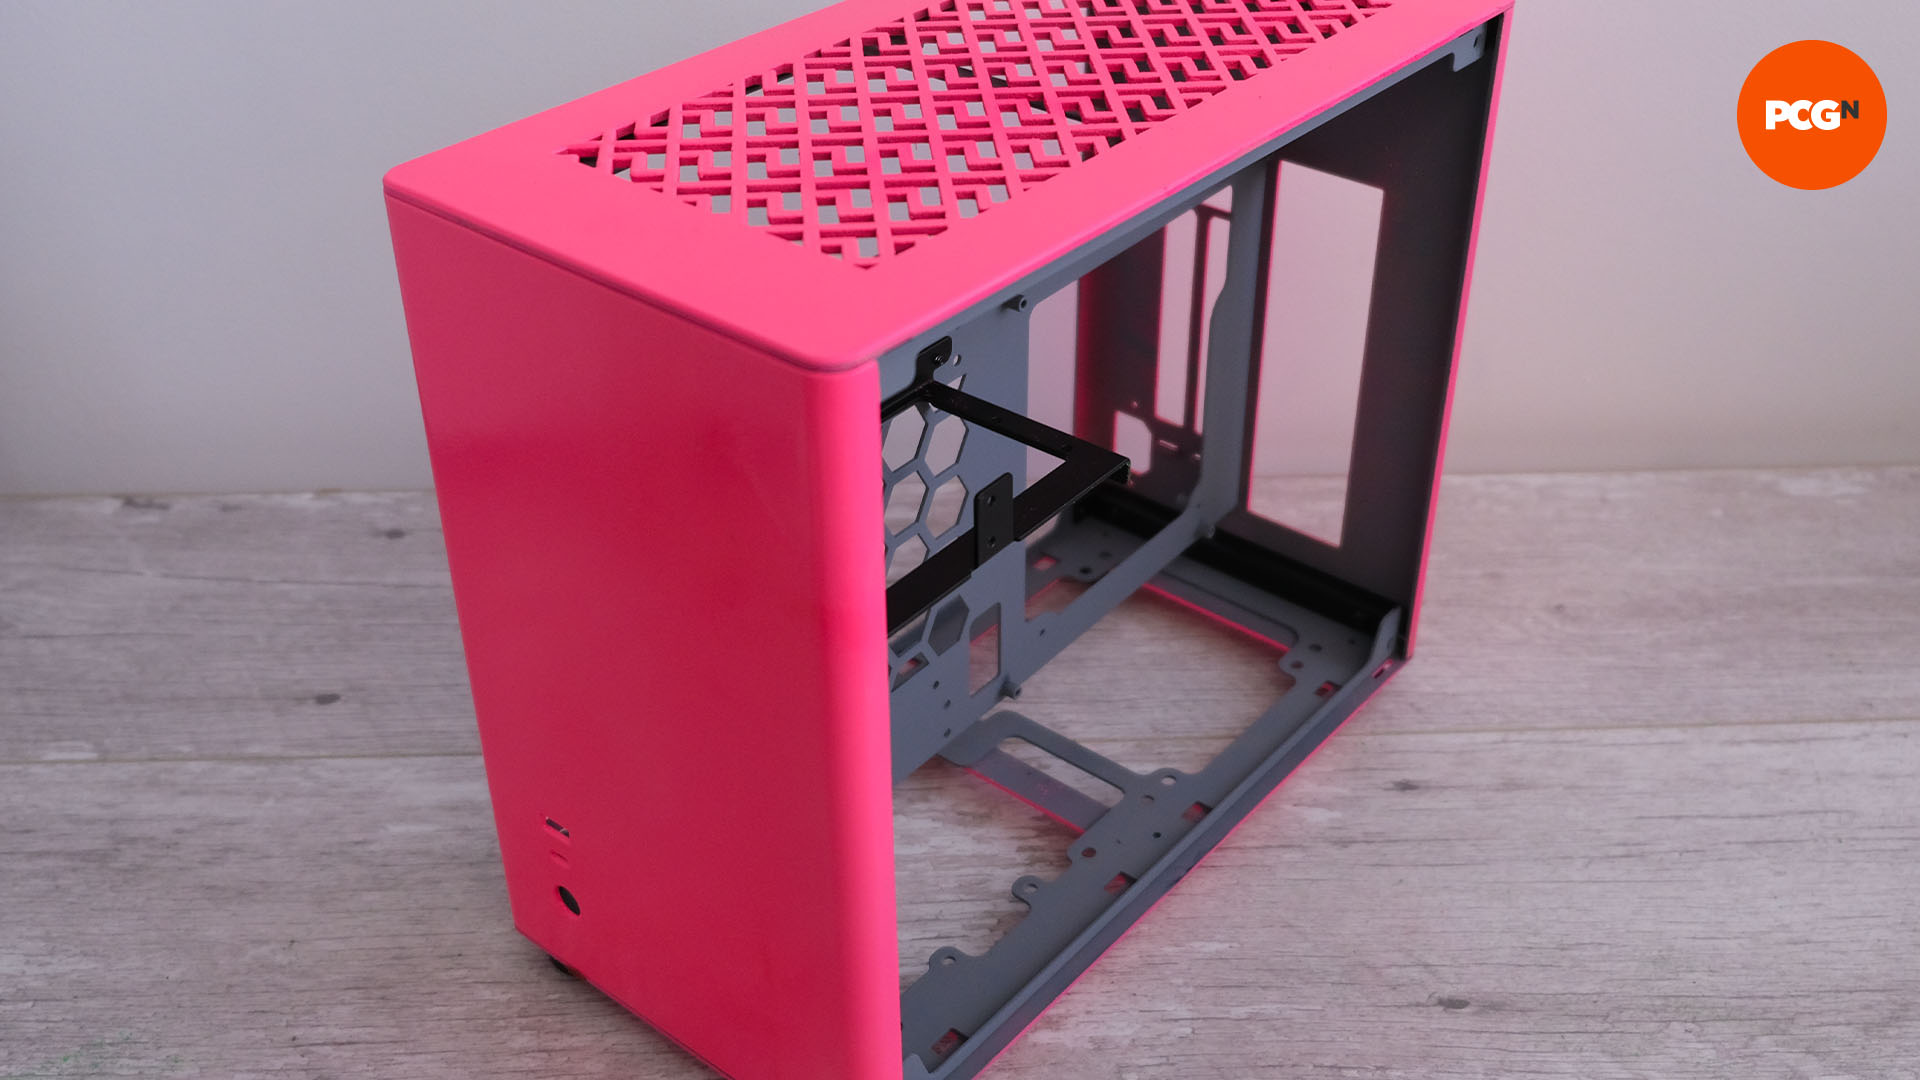 How to paint your PC case: Reassemble case